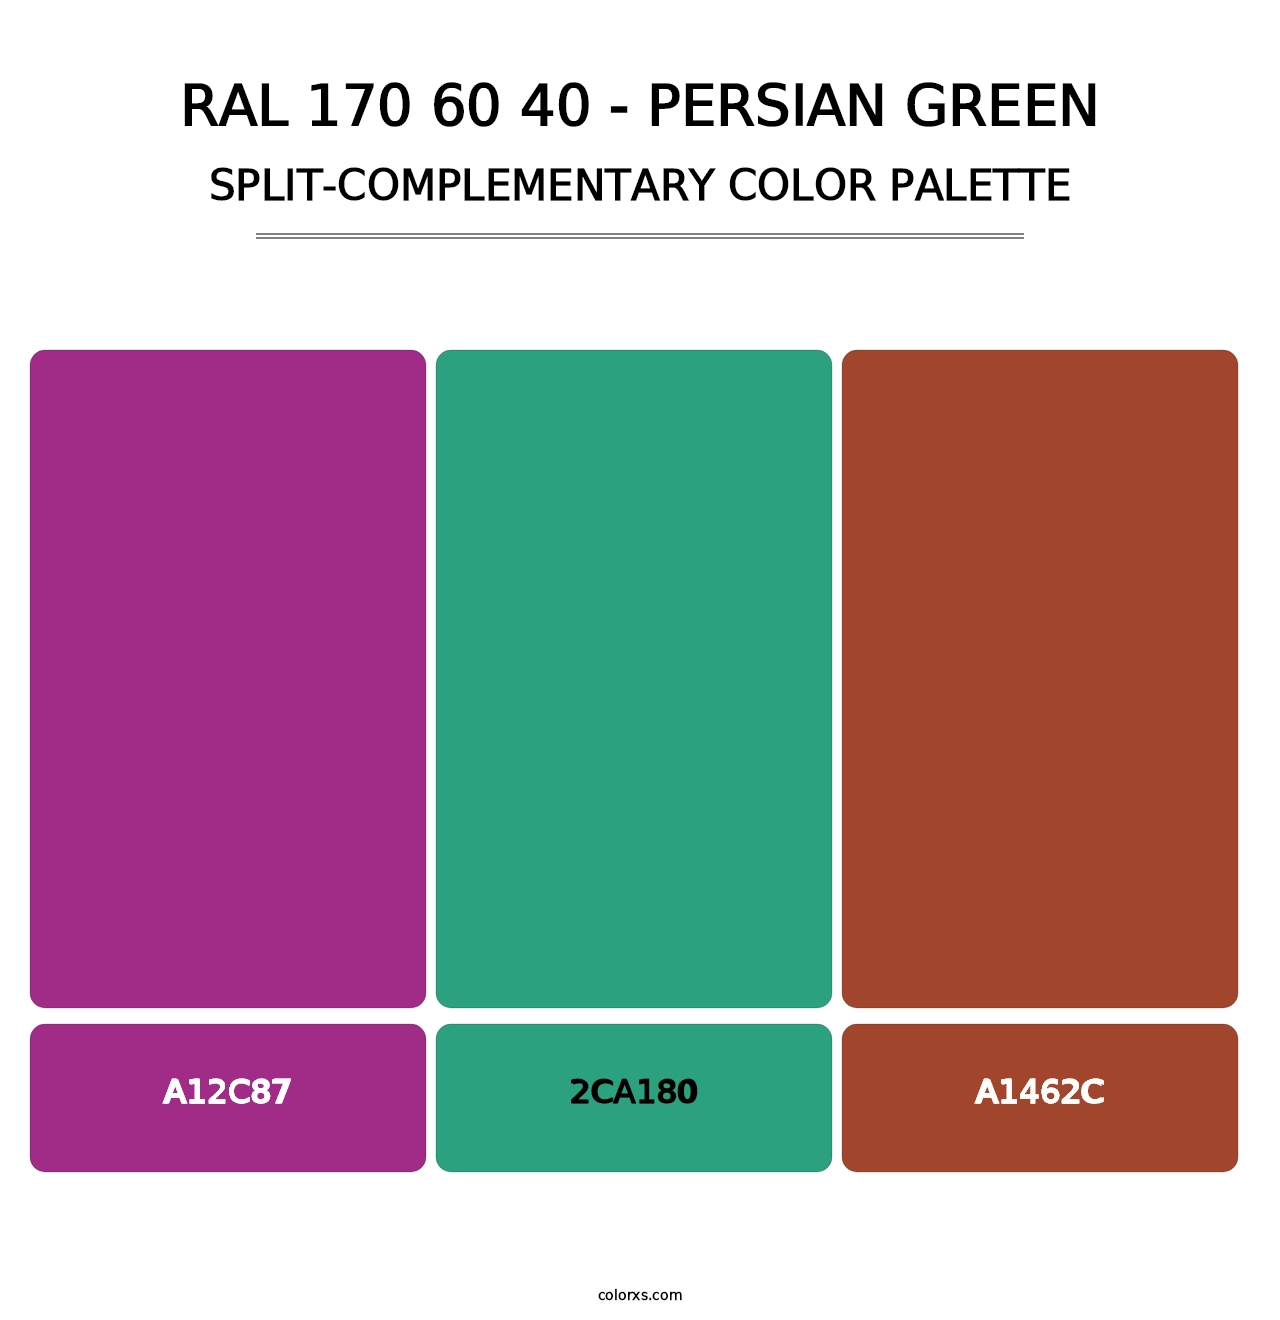 RAL 170 60 40 - Persian Green - Split-Complementary Color Palette